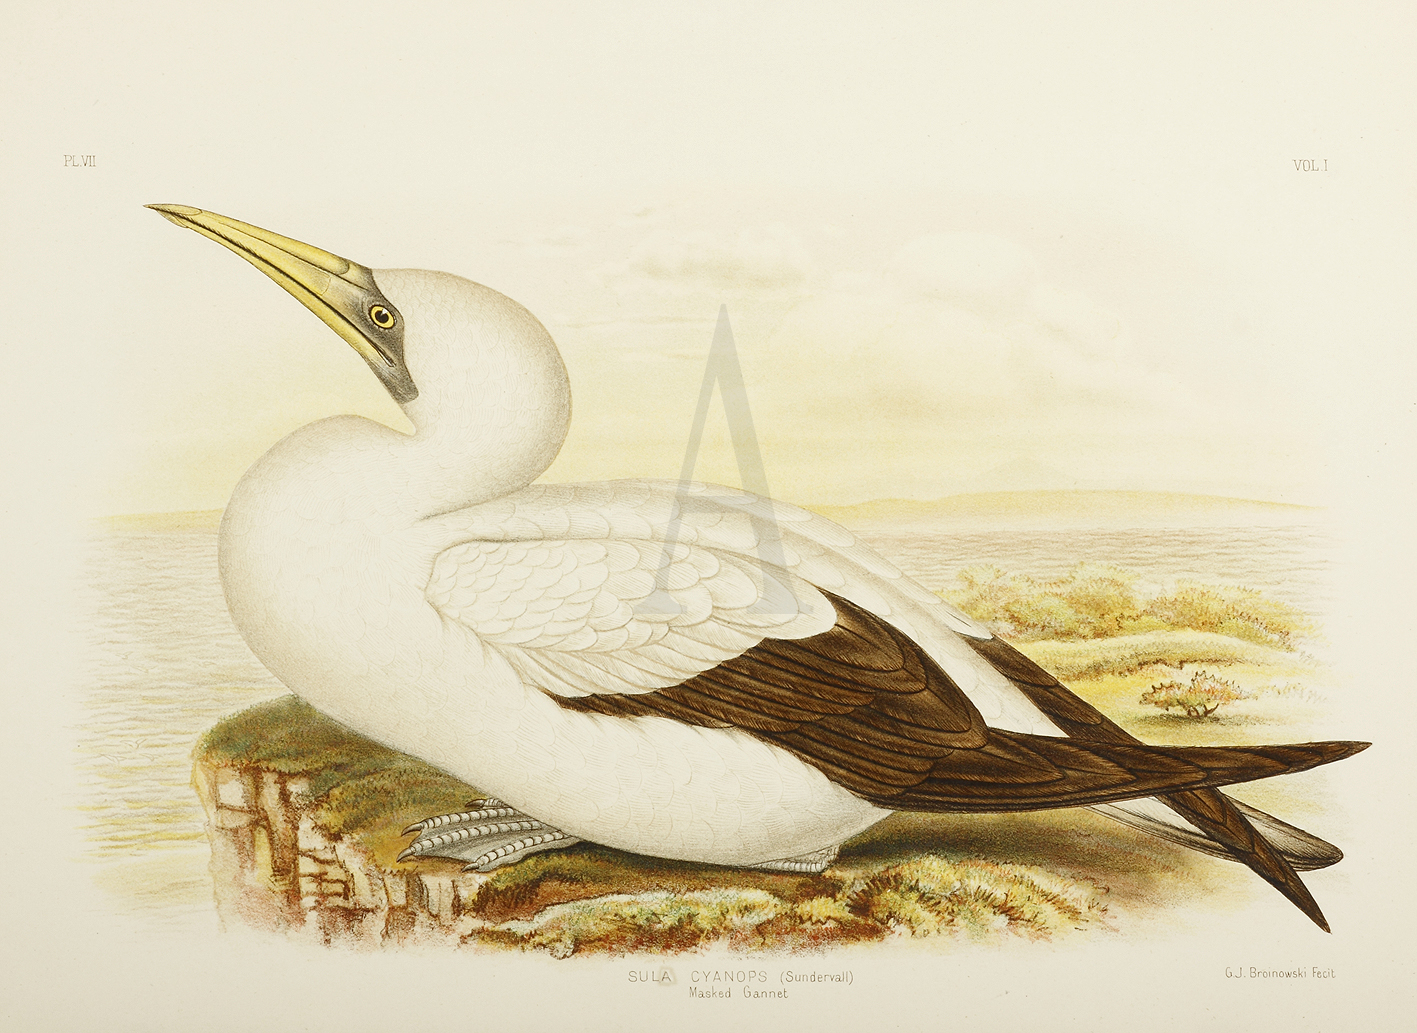 Sula Cyanops. Masked Gannet. - Antique Print from 1889